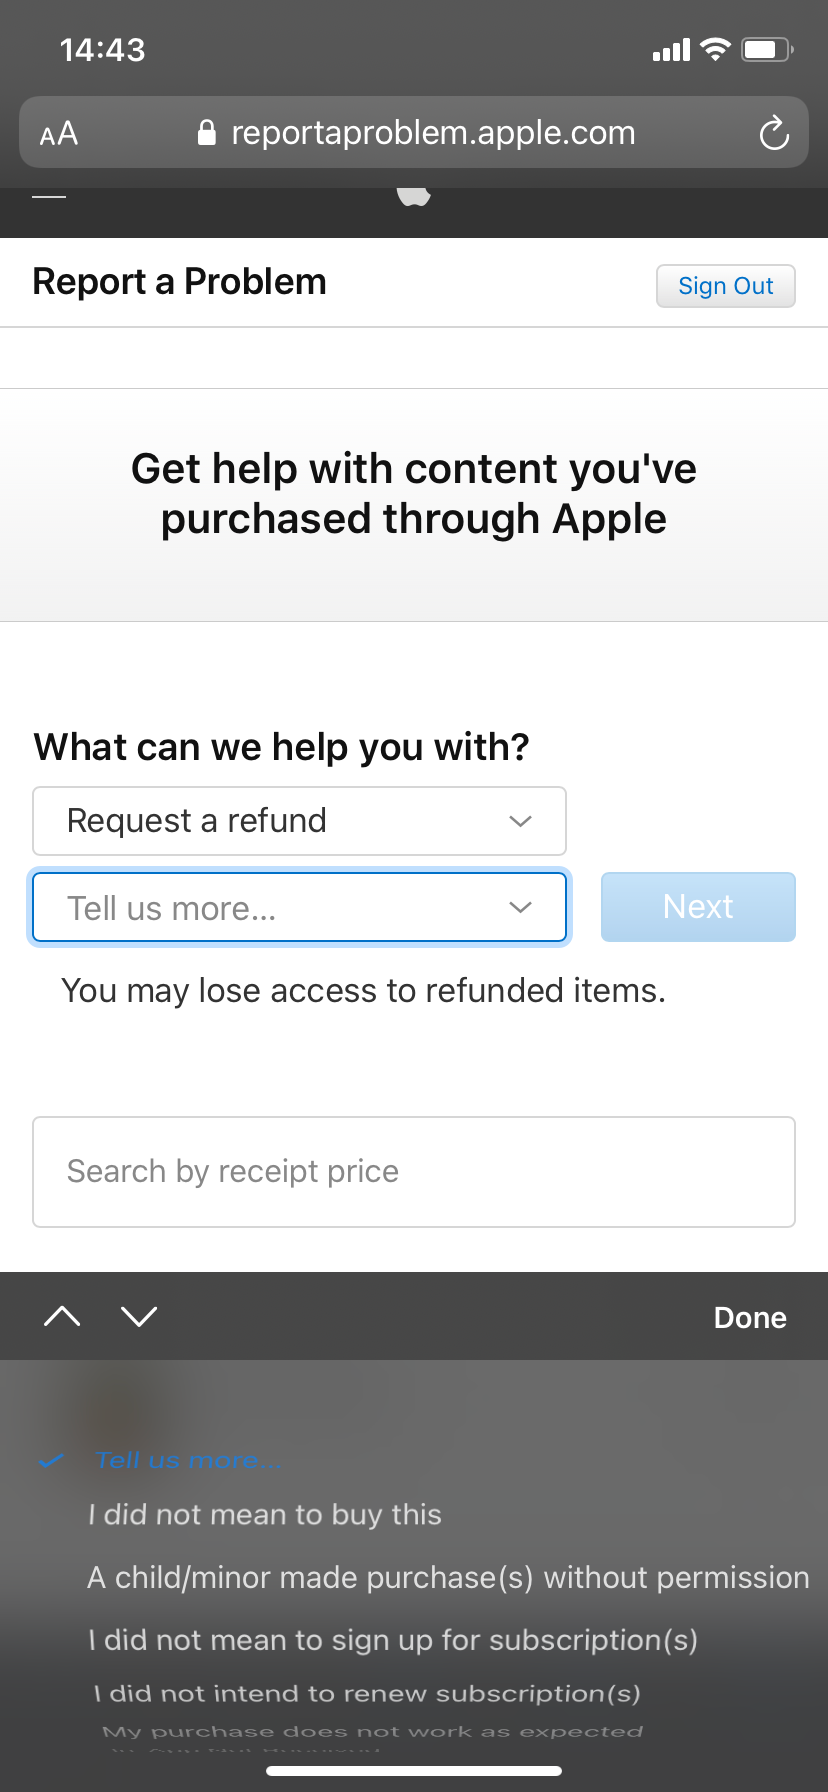 How to get an iPhone app refund from Apple - PhoneArena